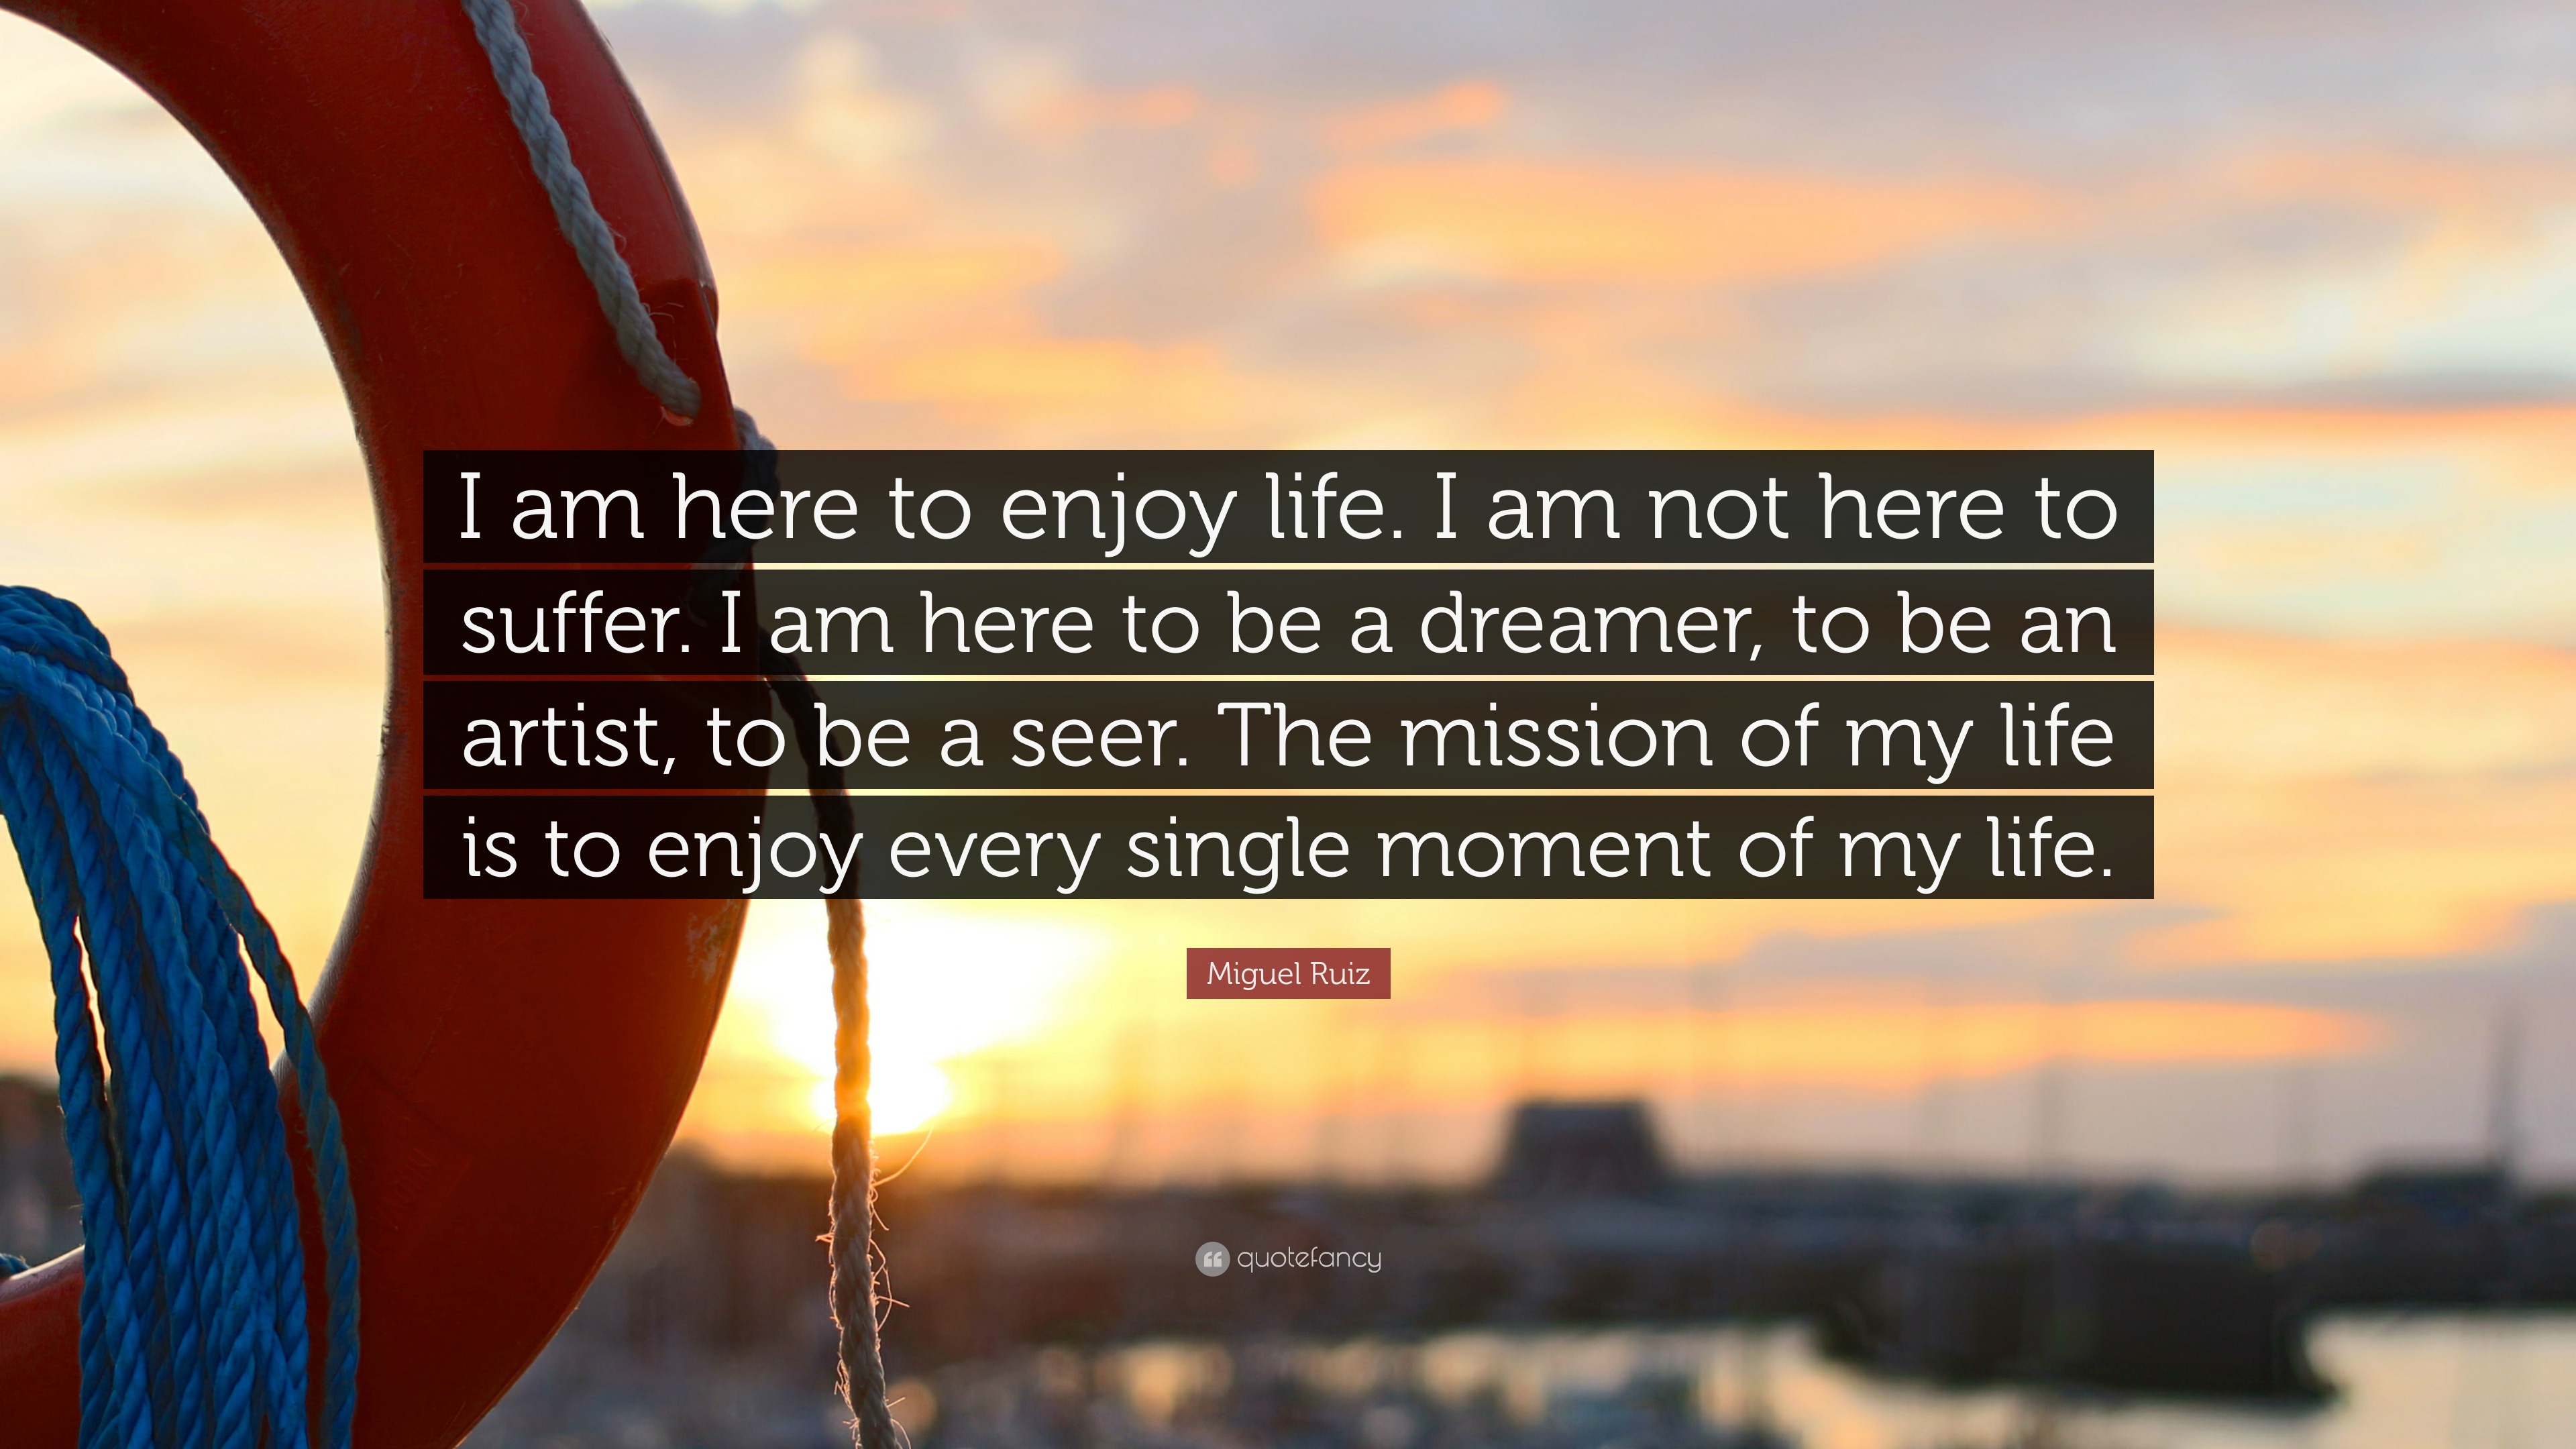 Miguel Ruiz Quote “I am here to enjoy life I am not here